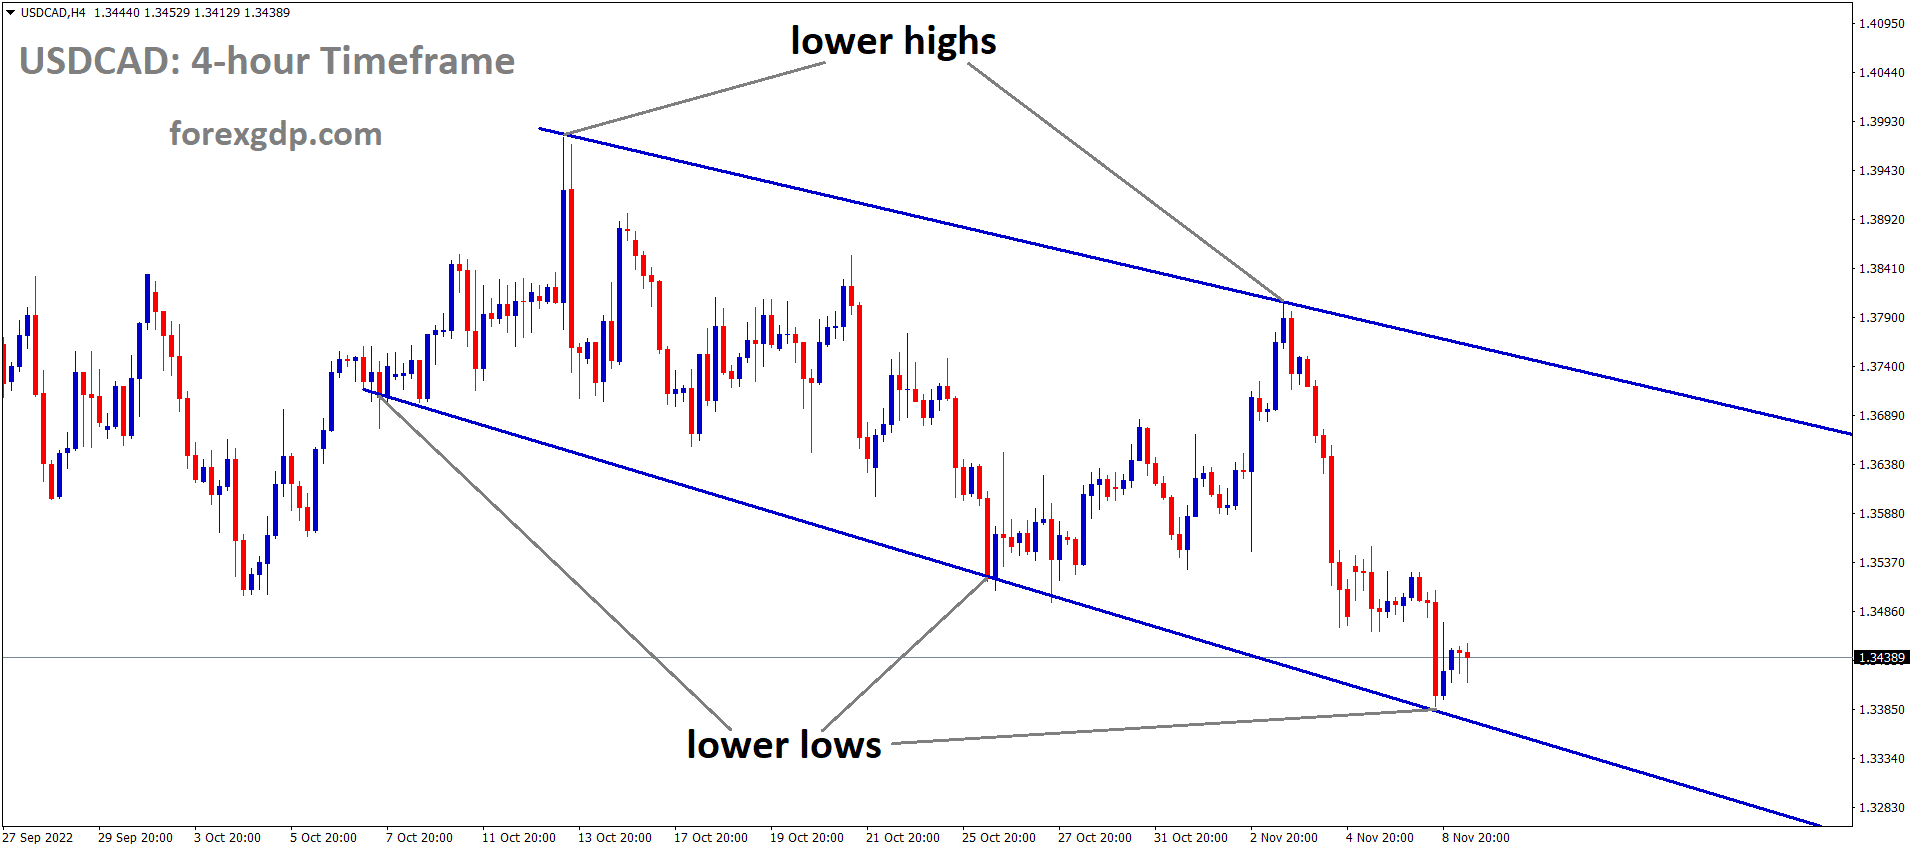 USDCAD is moving in the Descending channel and the market has reached the lower low area of the channel